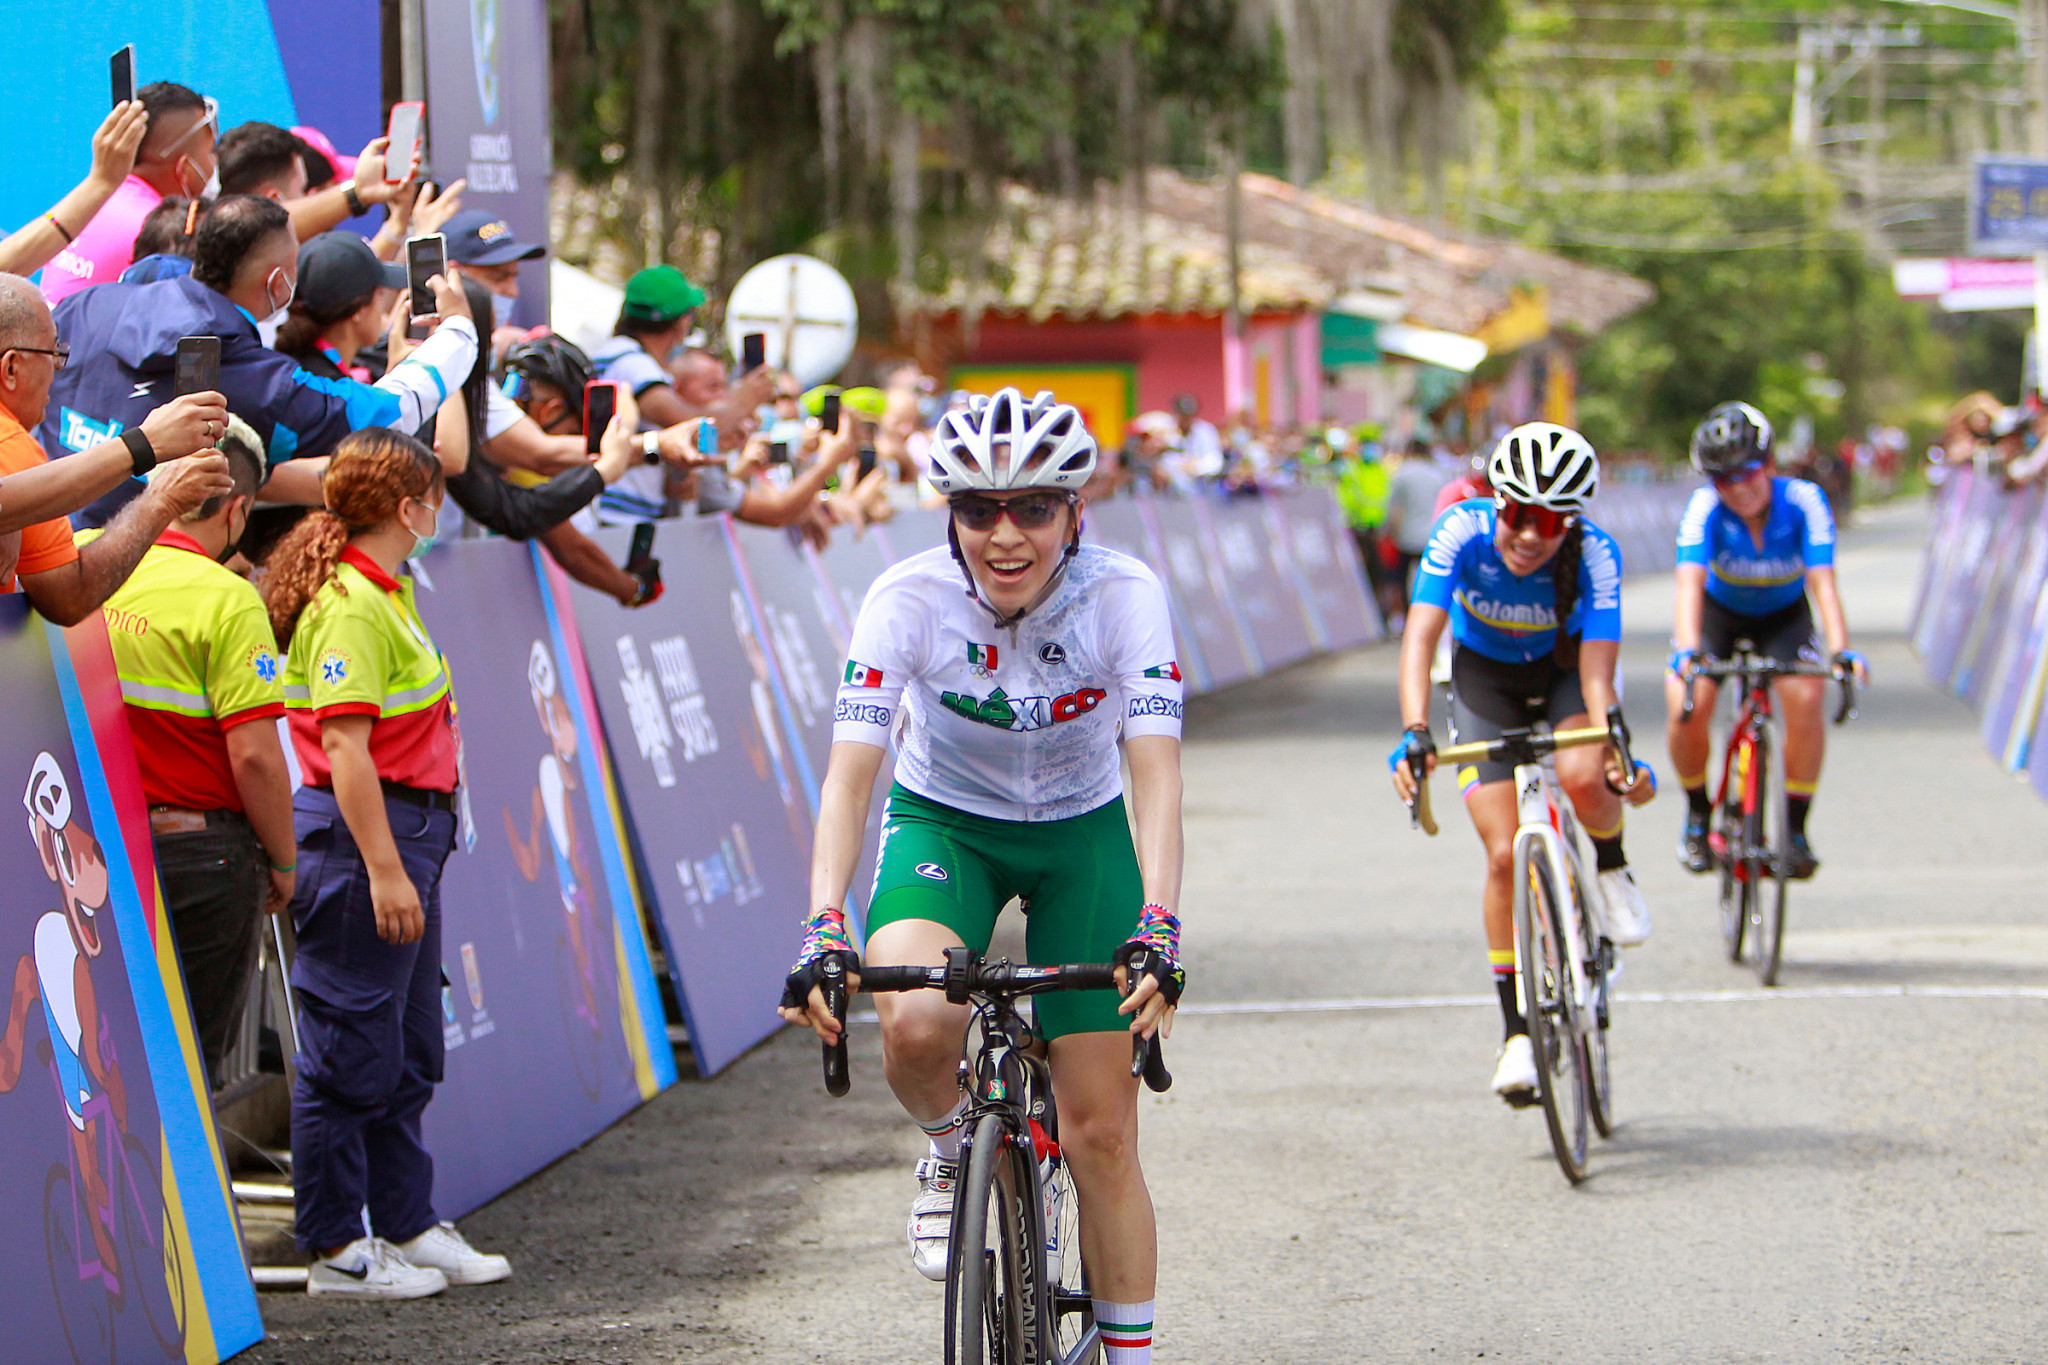 Mexico's Yareli Acevedo won the women's road race with Colombian duo Erika Botero López and Elizabeth Castaño Quintero following in second and third ©Agencia.Xpress Media